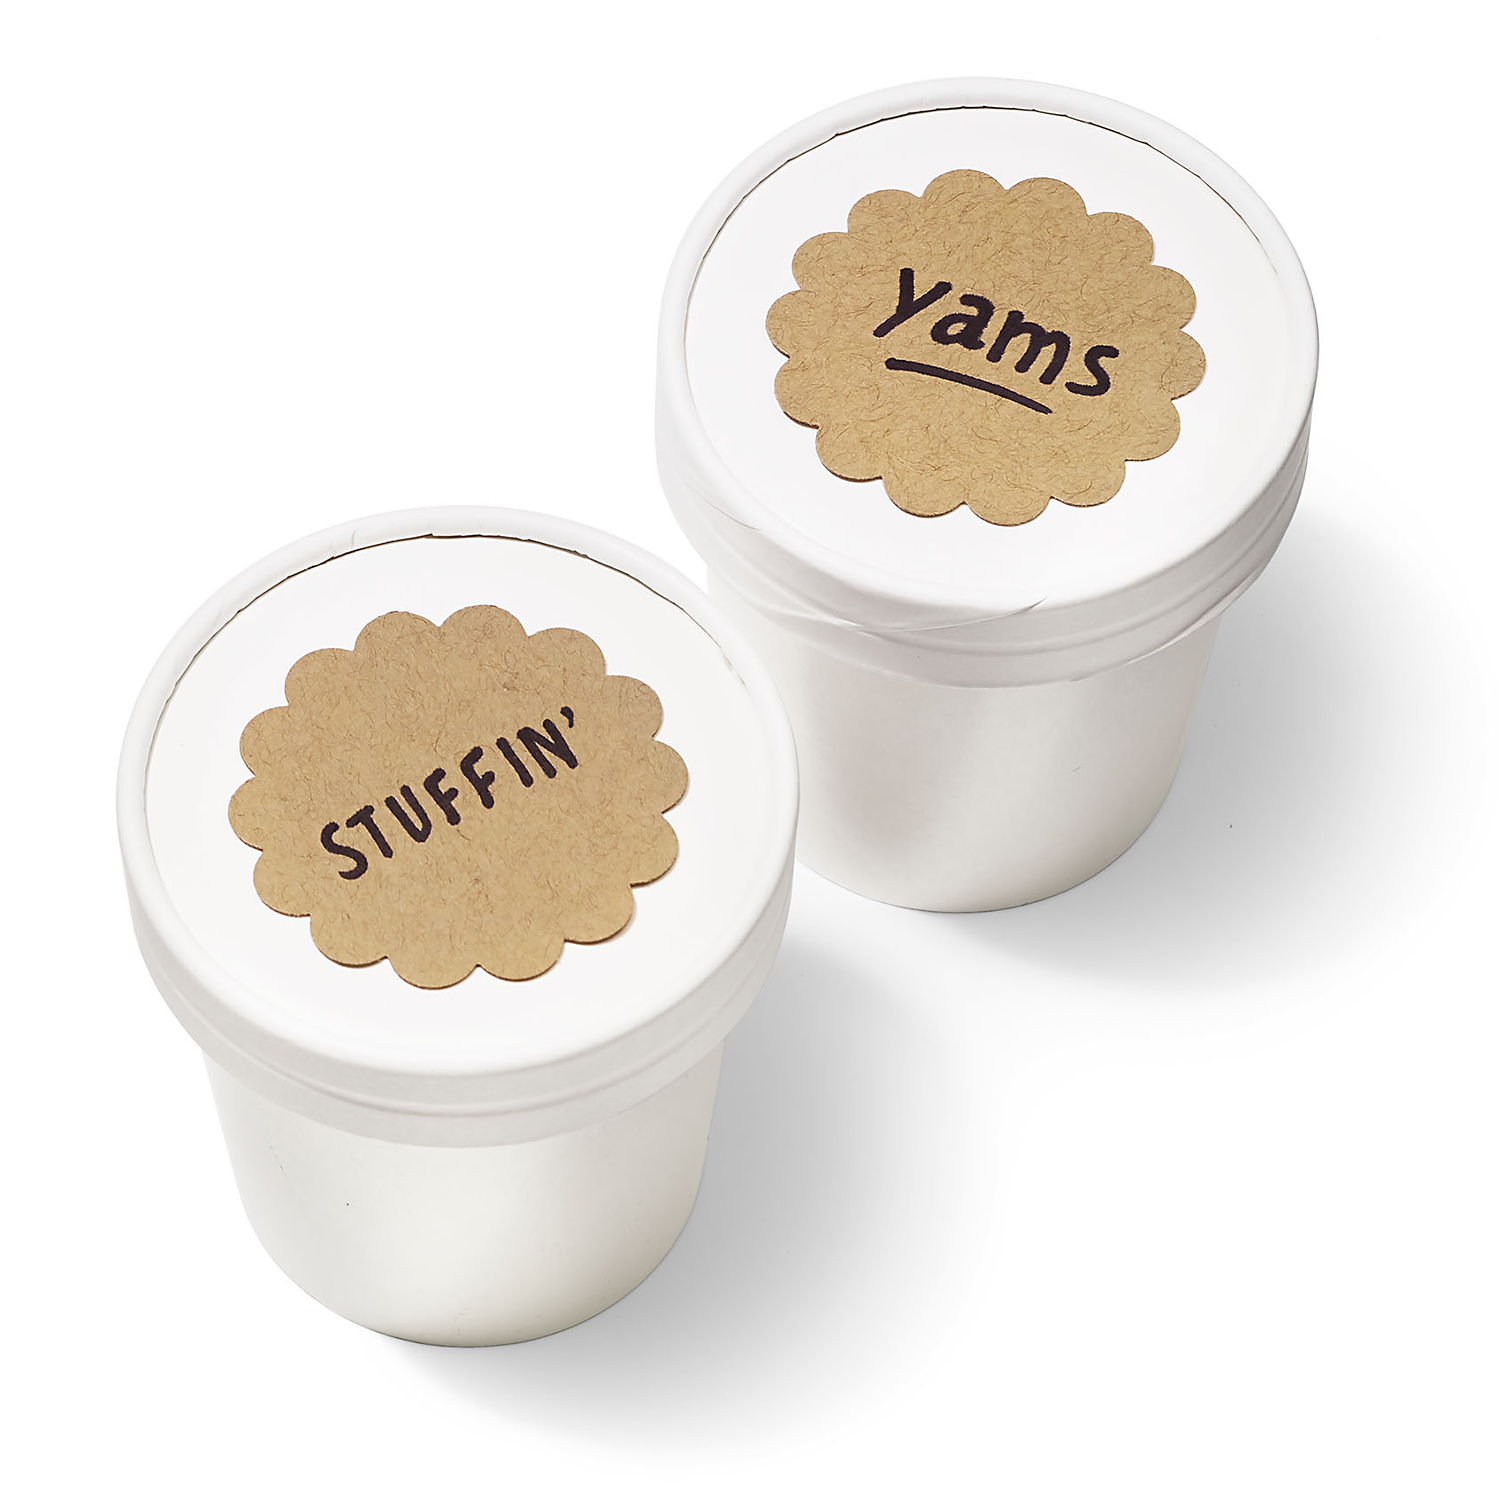 Soup cups with labels